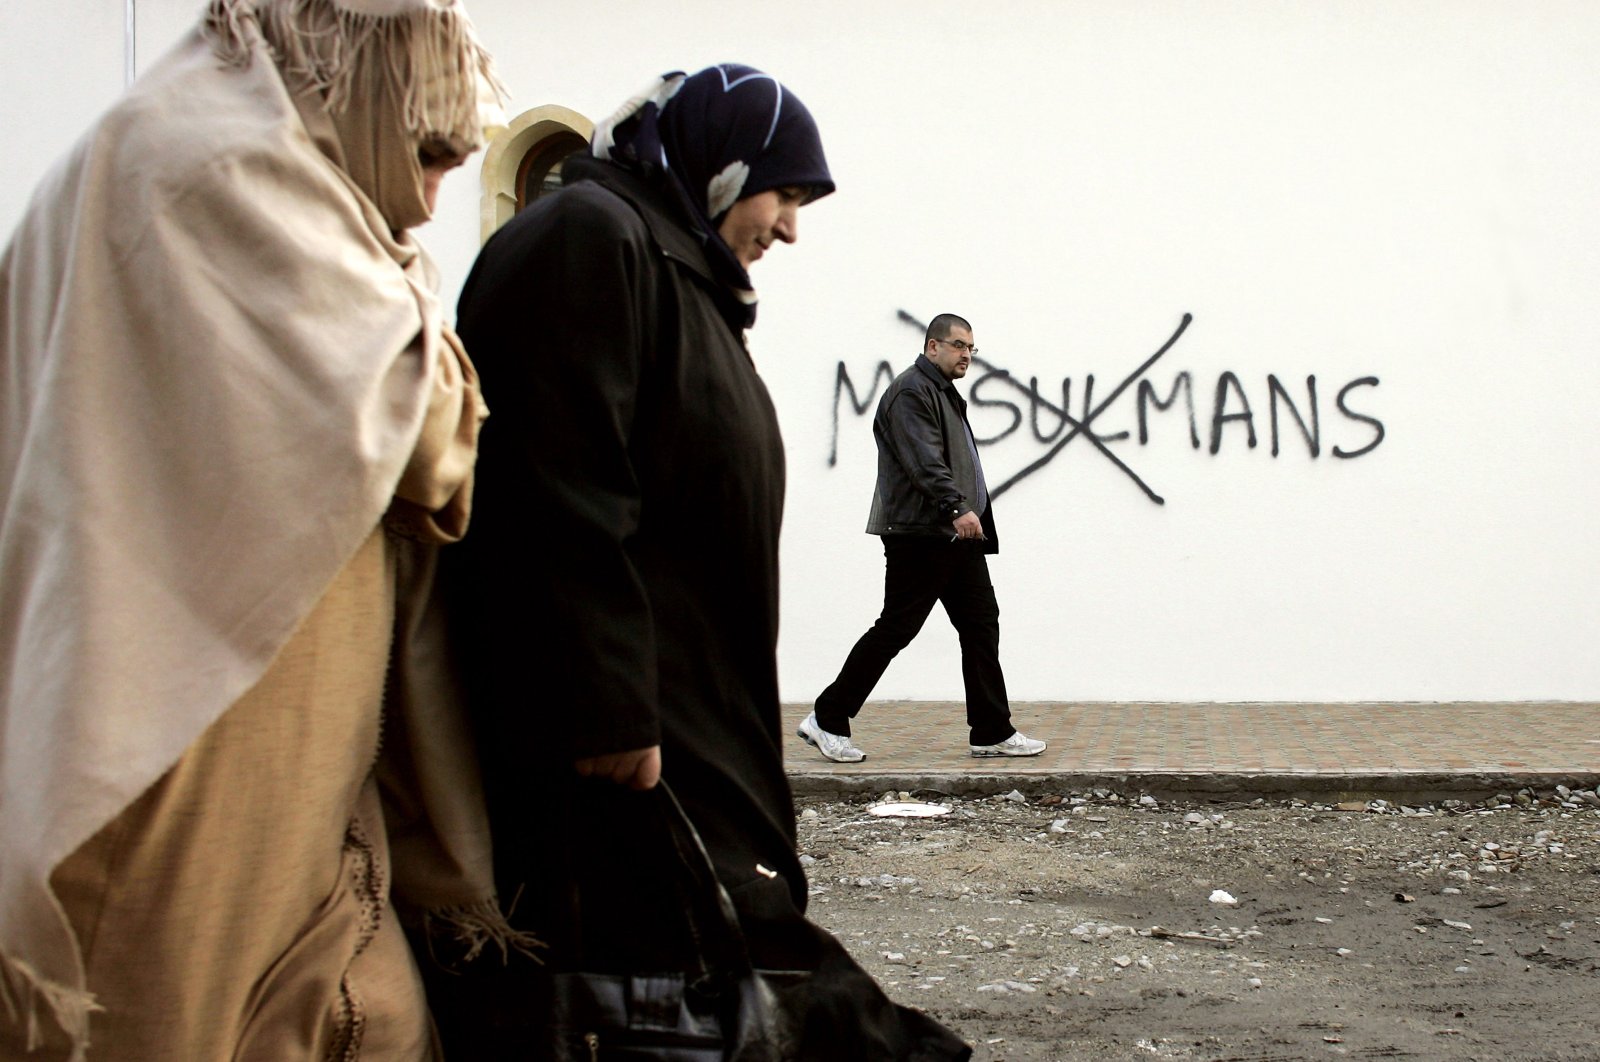 In this Feb. 8, 2010 file photo, Muslim residents walk past racial slurs painted on the walls of a mosque in the town of Saint-Etienne, central France. Graffiti reads: "Muslims". (AP Photo)